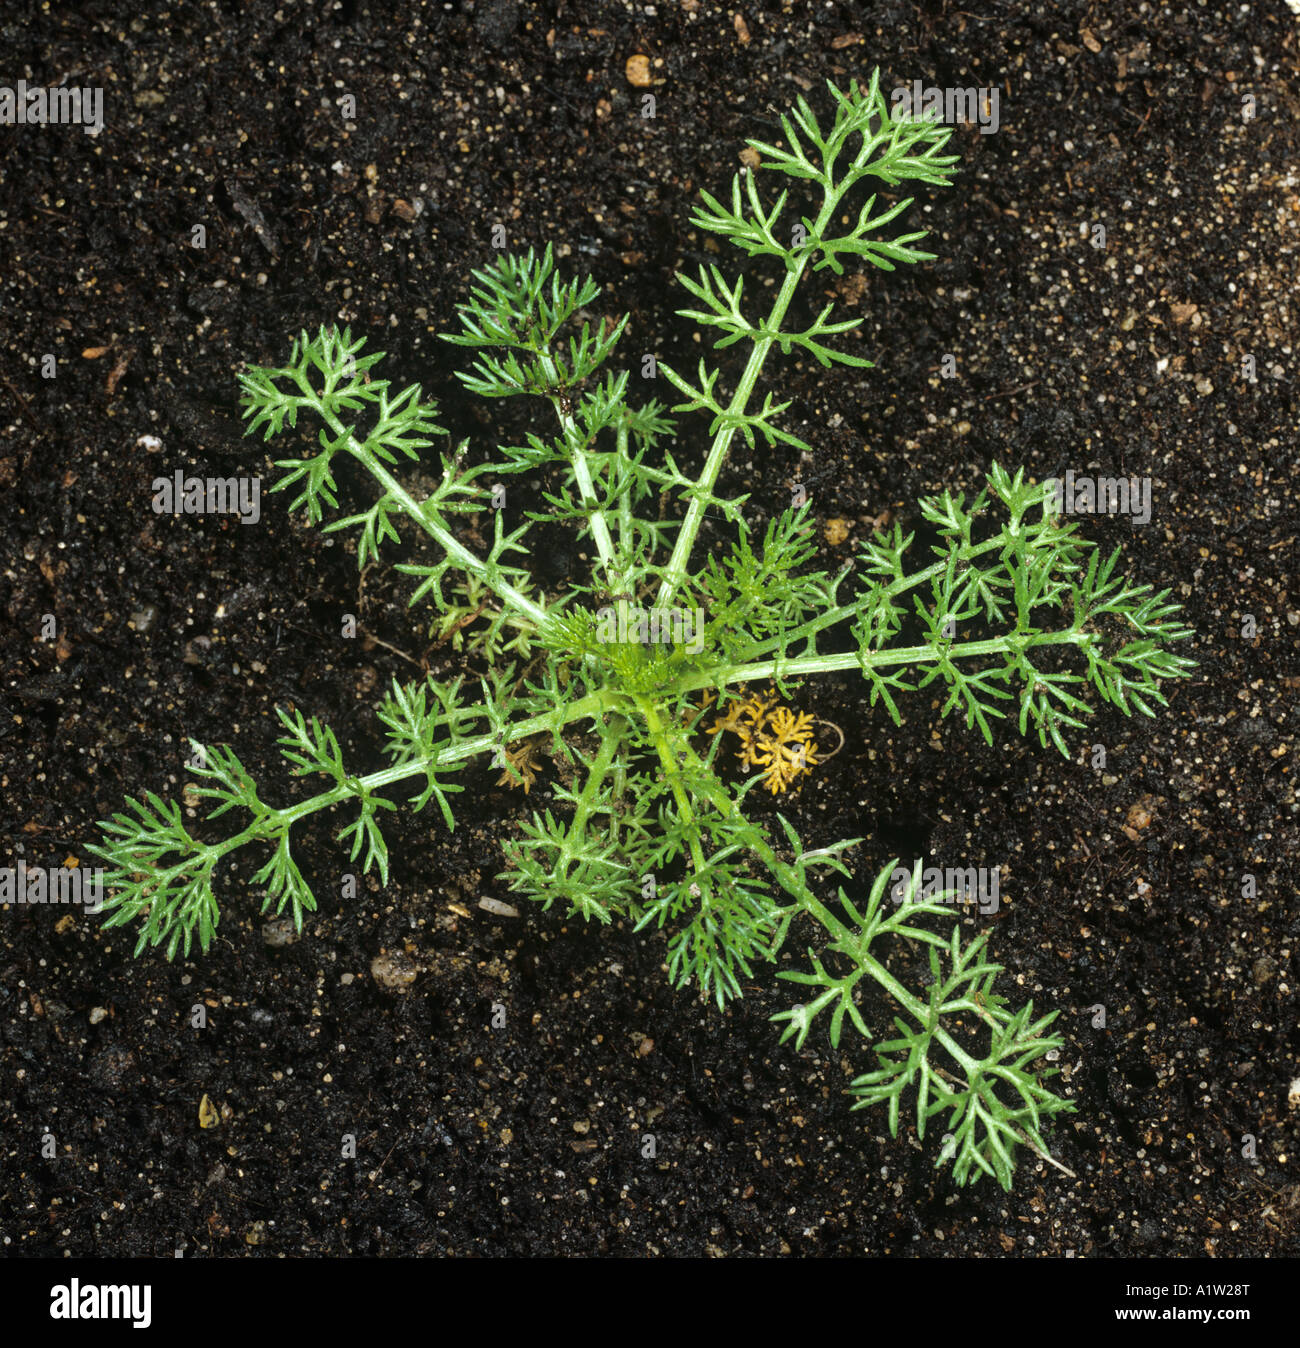 Scentless mayweed Matricaria perforata young plant leaf rosette Stock ...